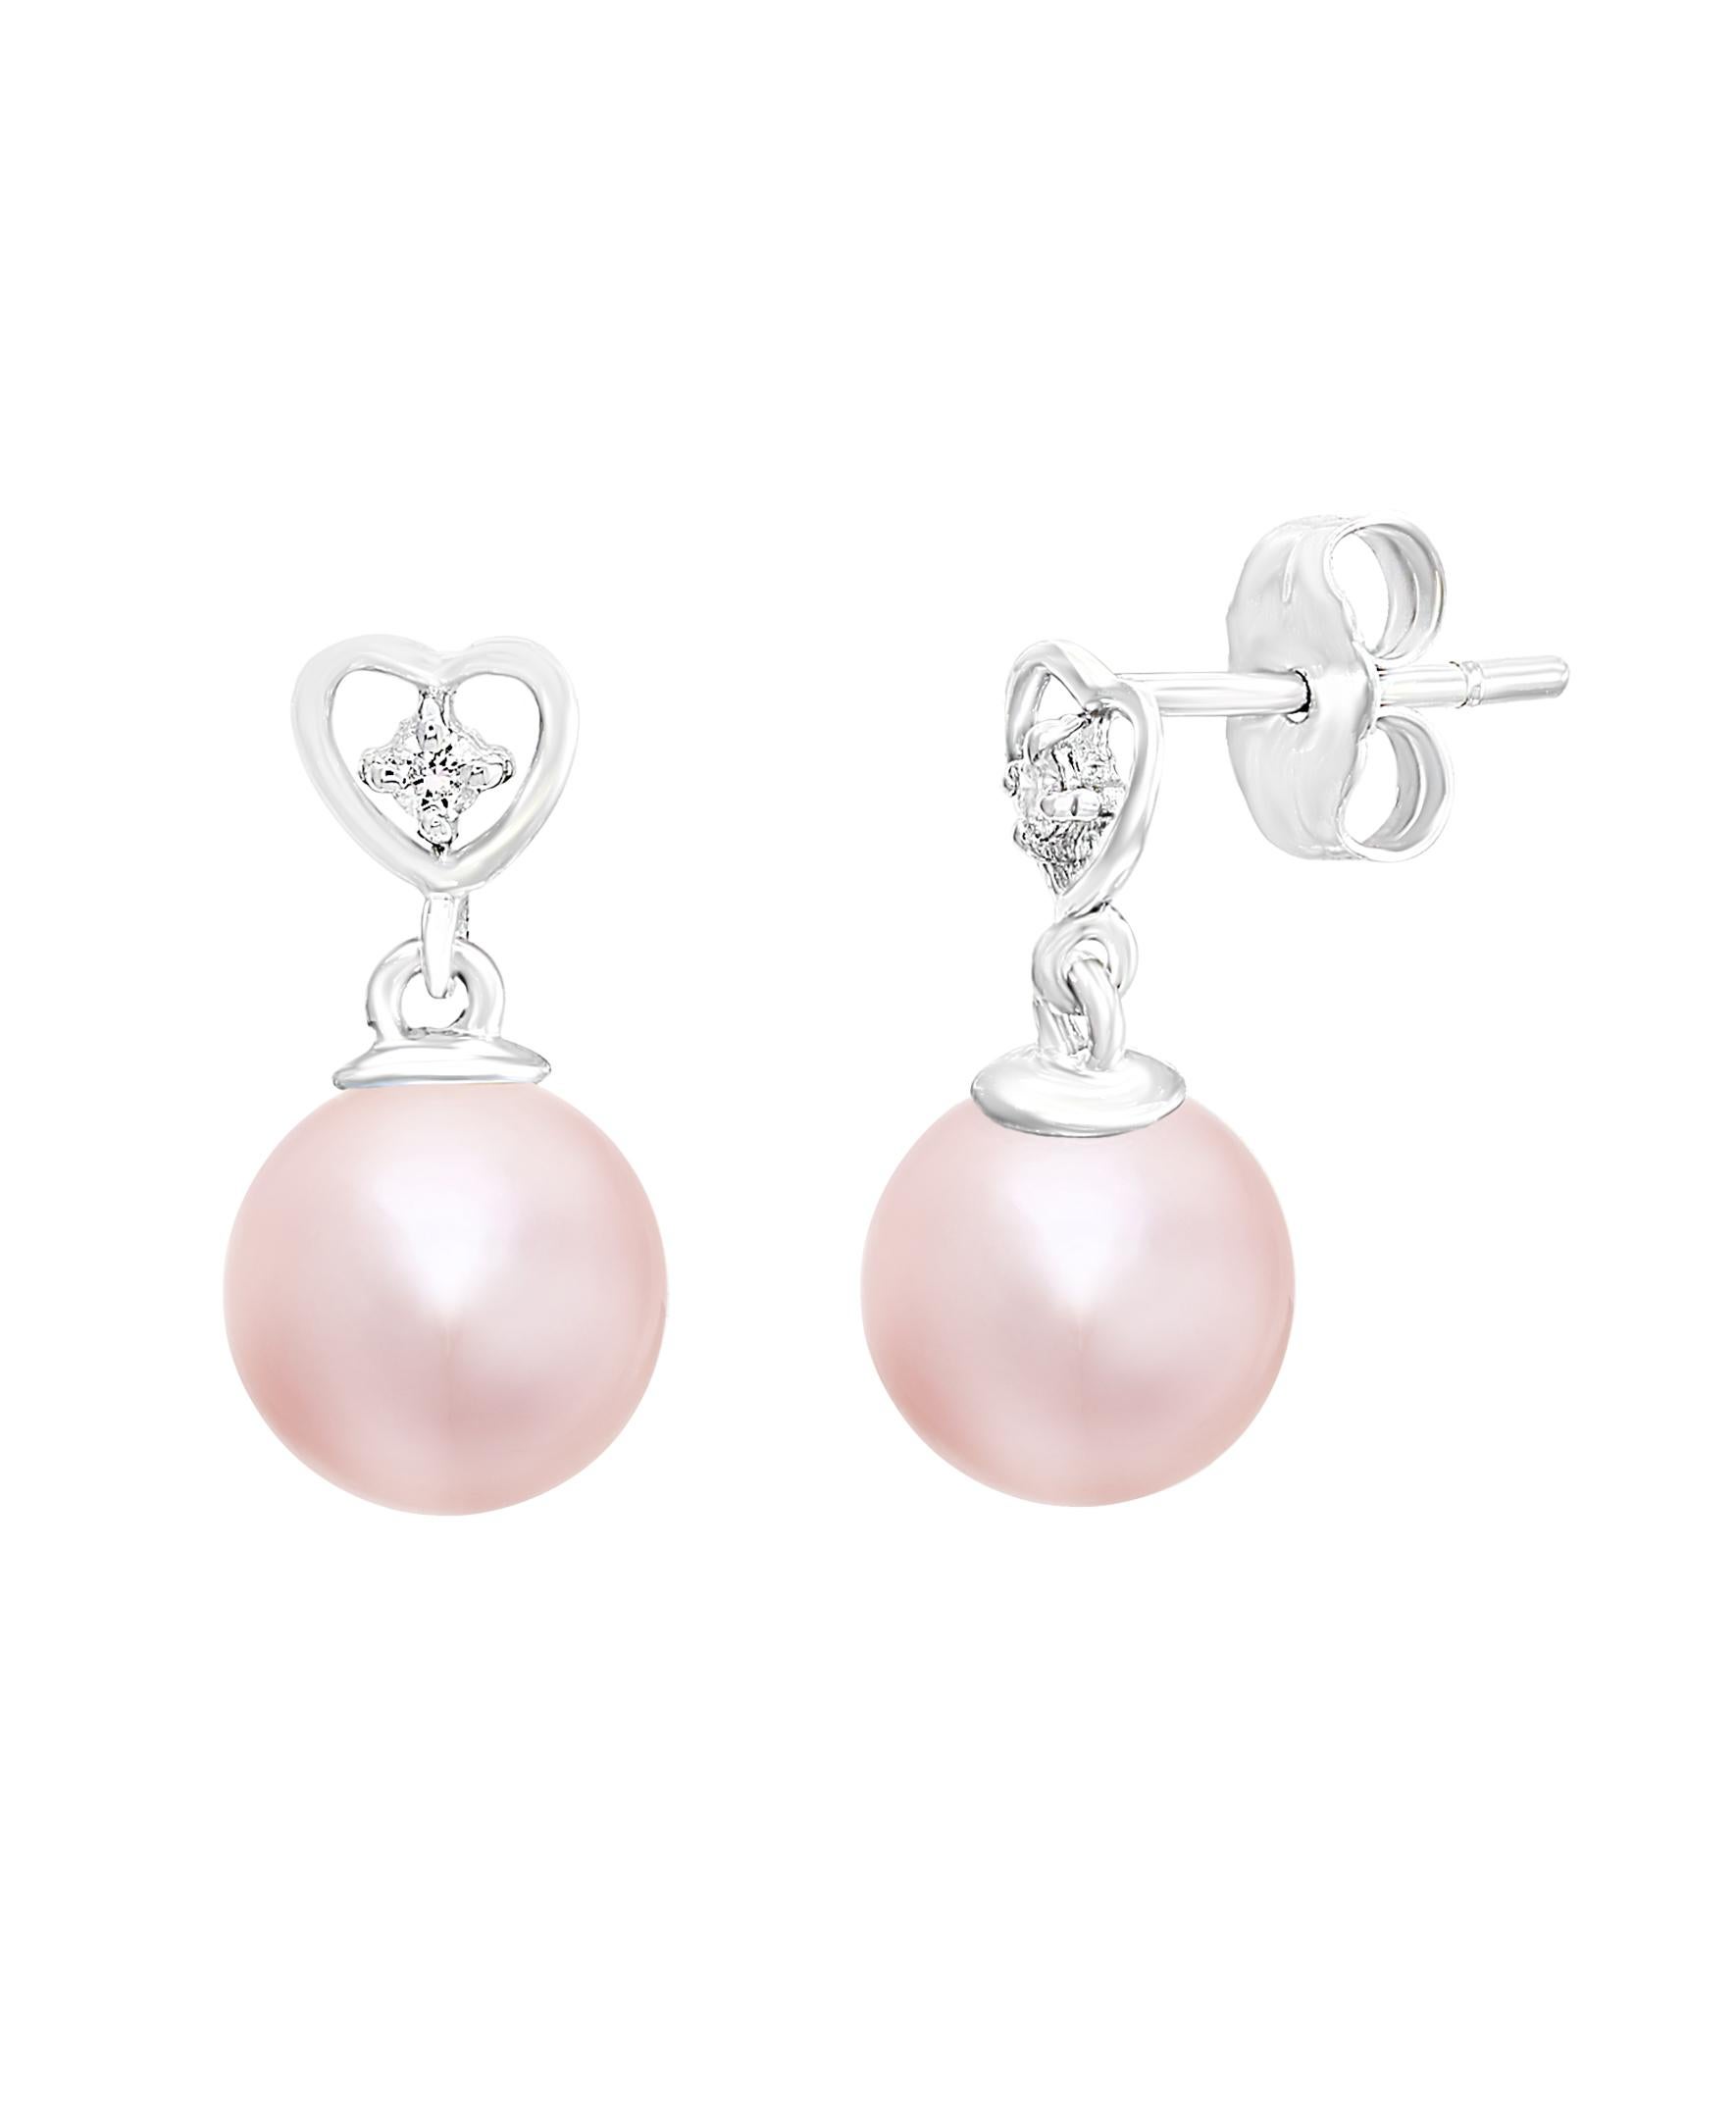 These elegant Diamond and Pearl earrings contain Chinese Freshwater natural-color pink round cultured pearls measuring 8-8.5mm dangling from white gold and diamond hearts with 0.04 carats of diamonds. Simple, yet elegant, these earrings are a great